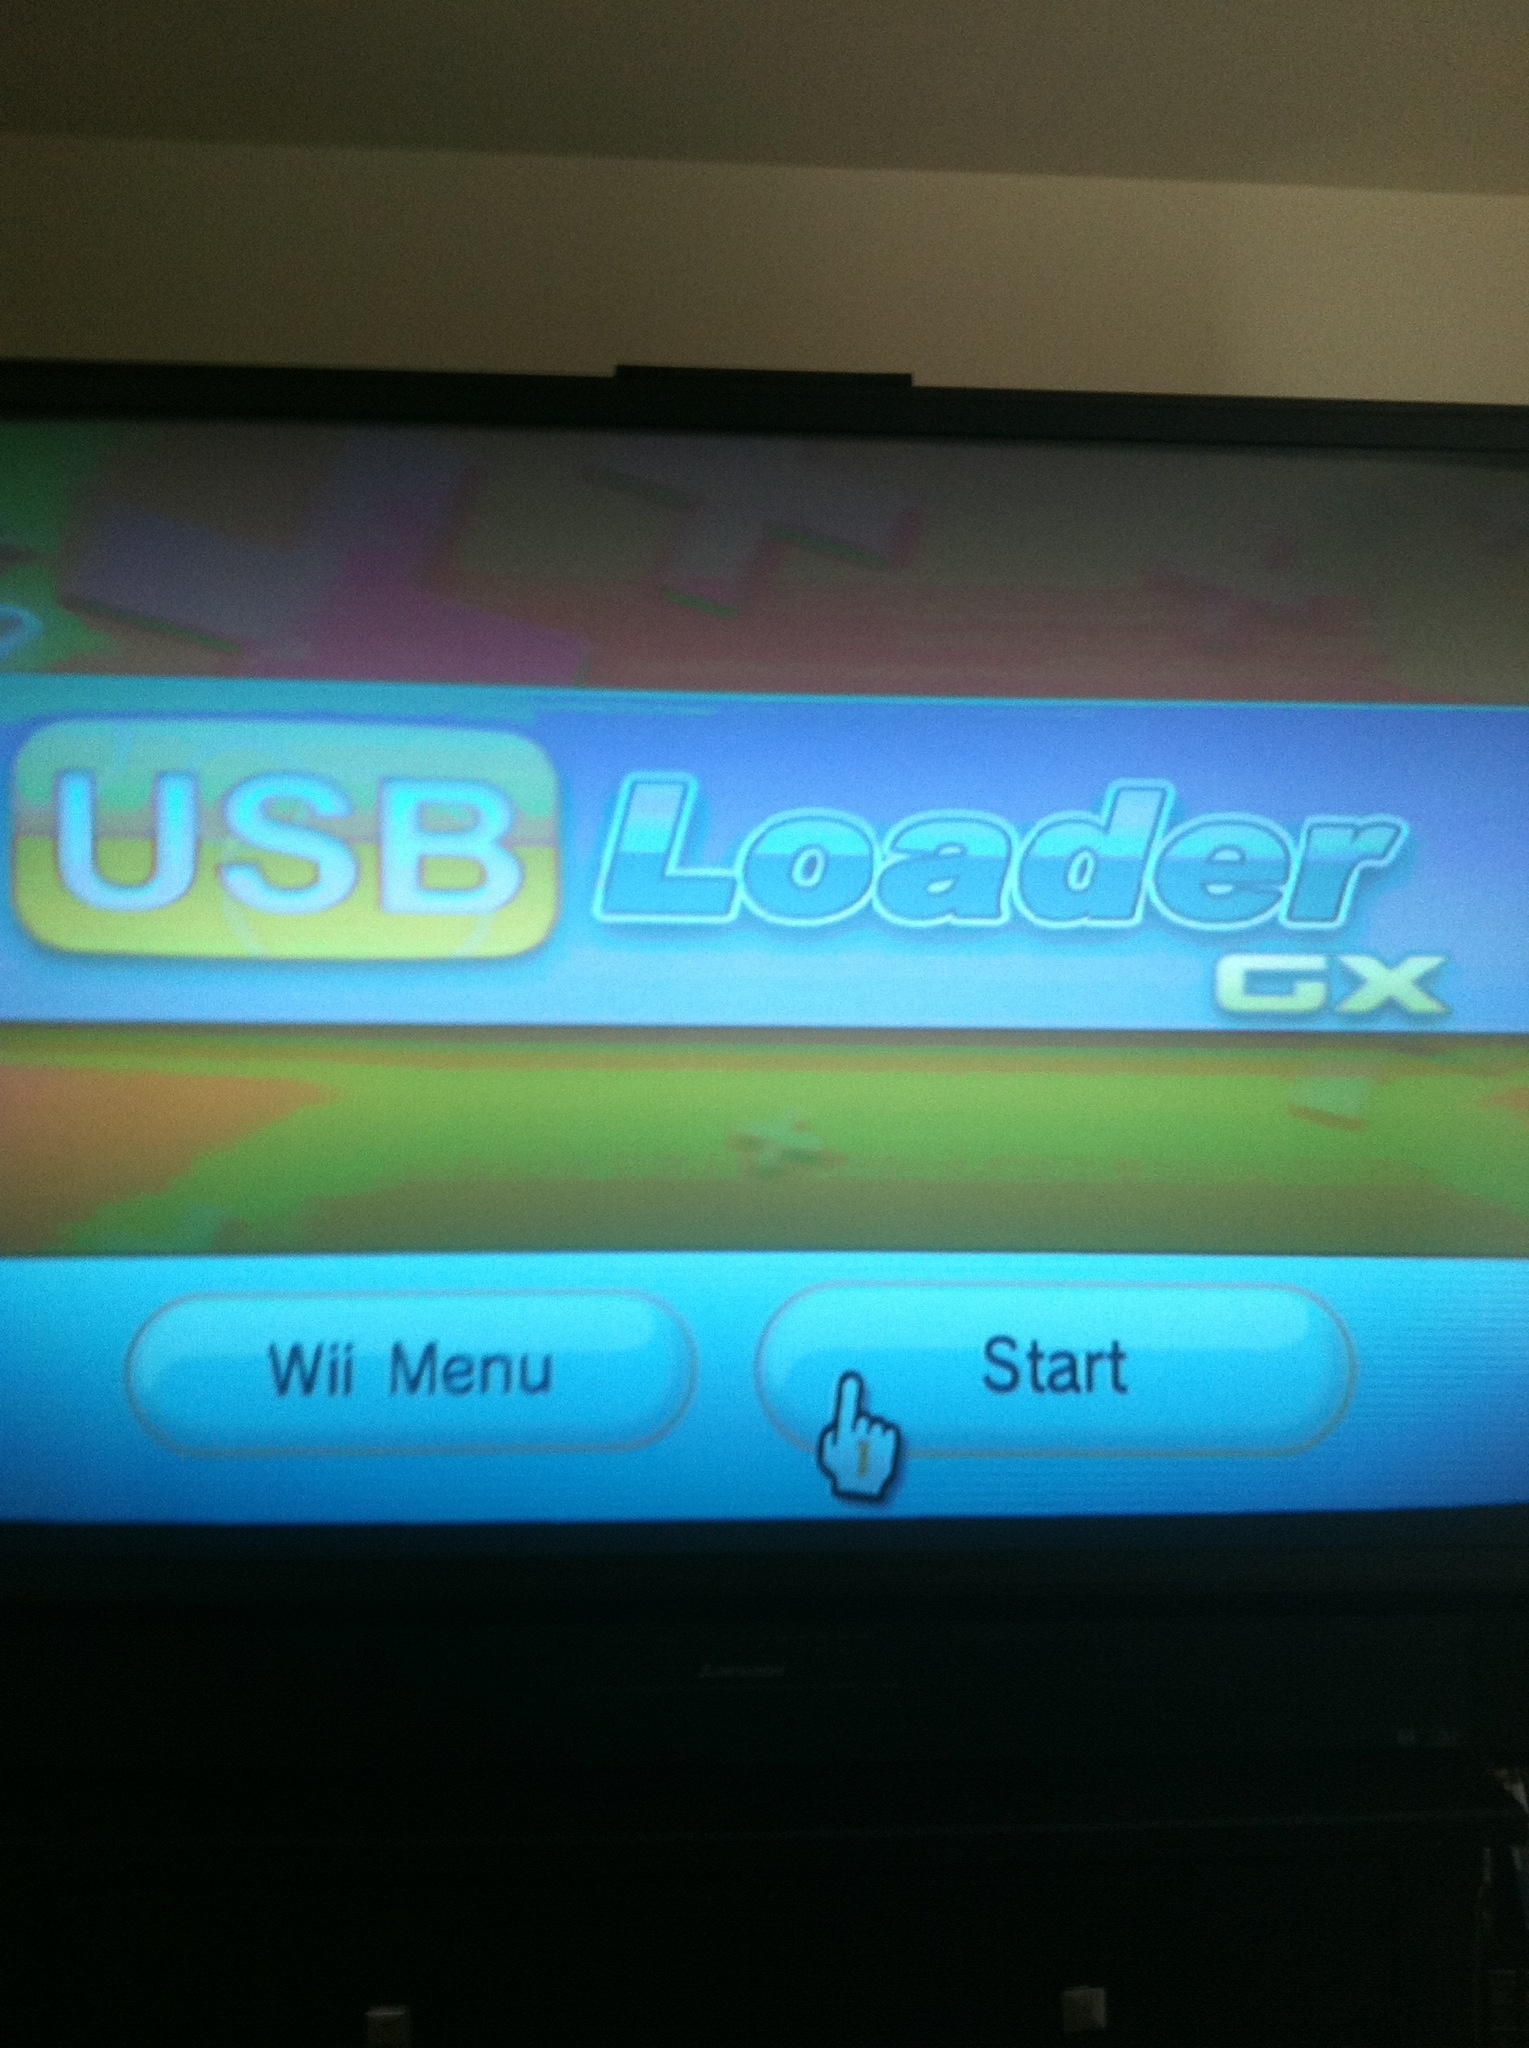 format hard drive for wii usb loader gx